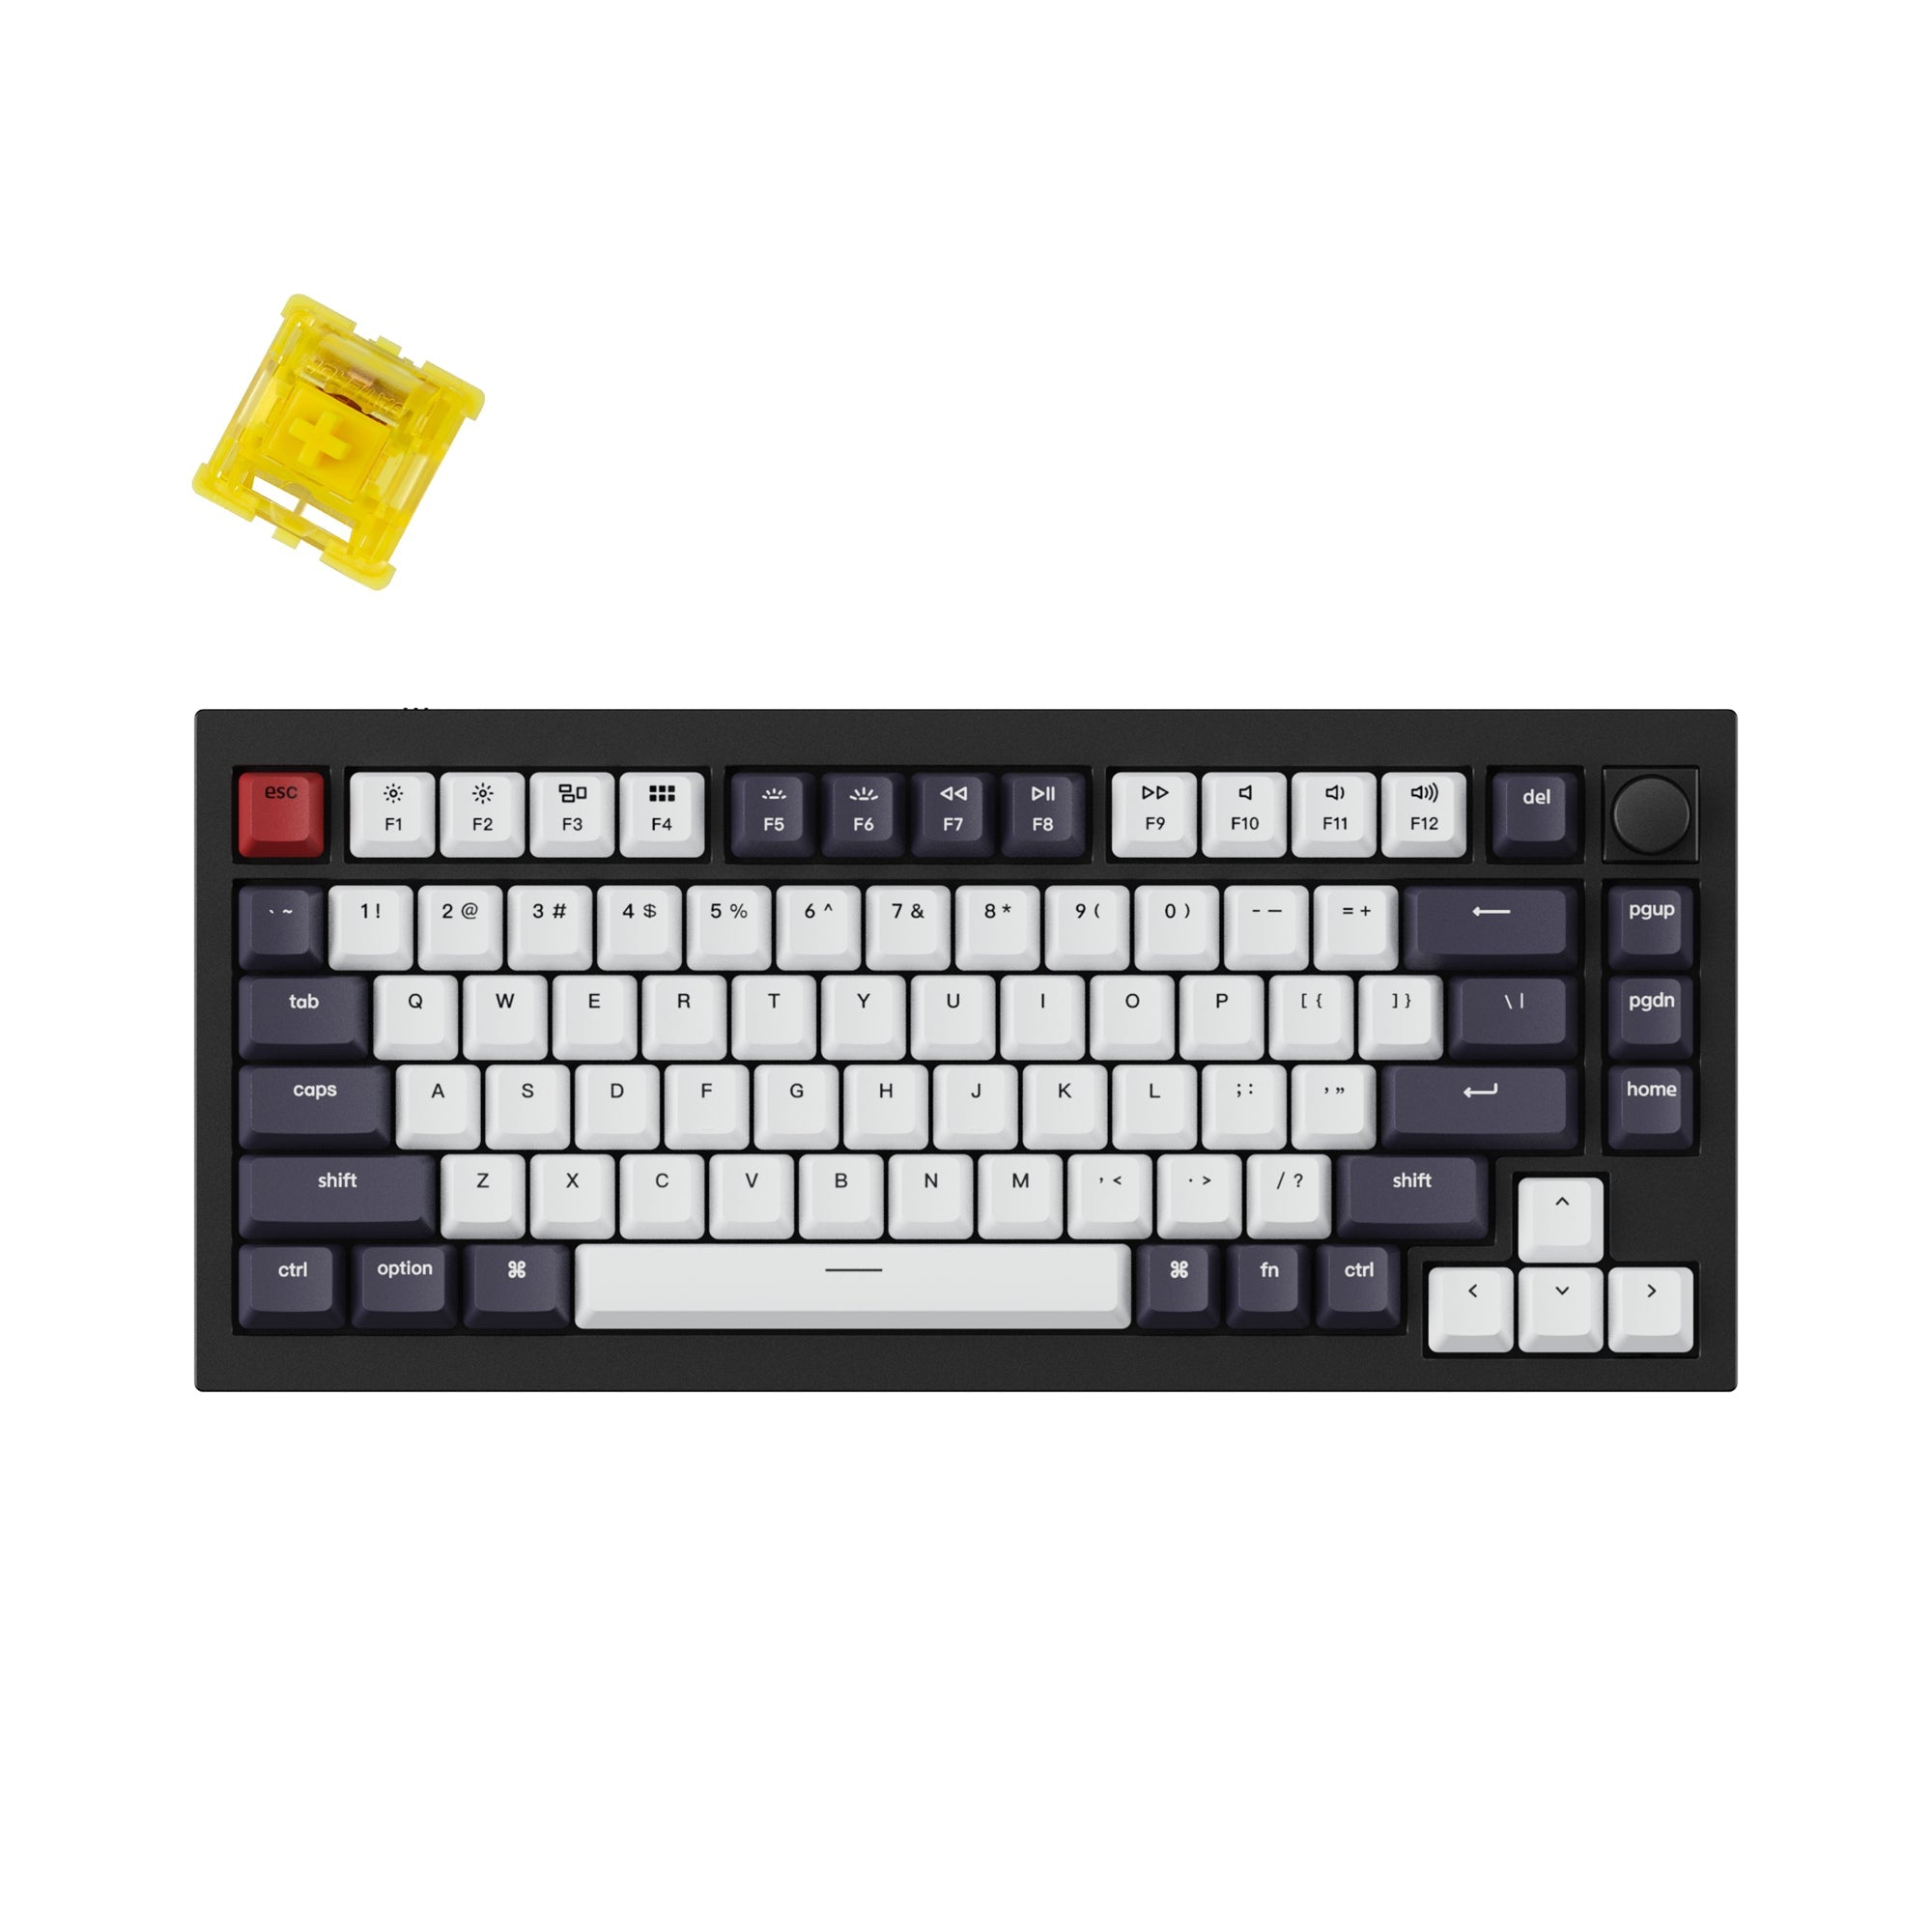    Keychron-Q1-QMK-VIA-custom-mechanical-keyboard-rotarty-encoder-knob-version-with-double-gasket-design-screw-in-pcb-stabilizer-and-hot-swappable-south-facing-rgb-black-frame-Phantom-Yellow